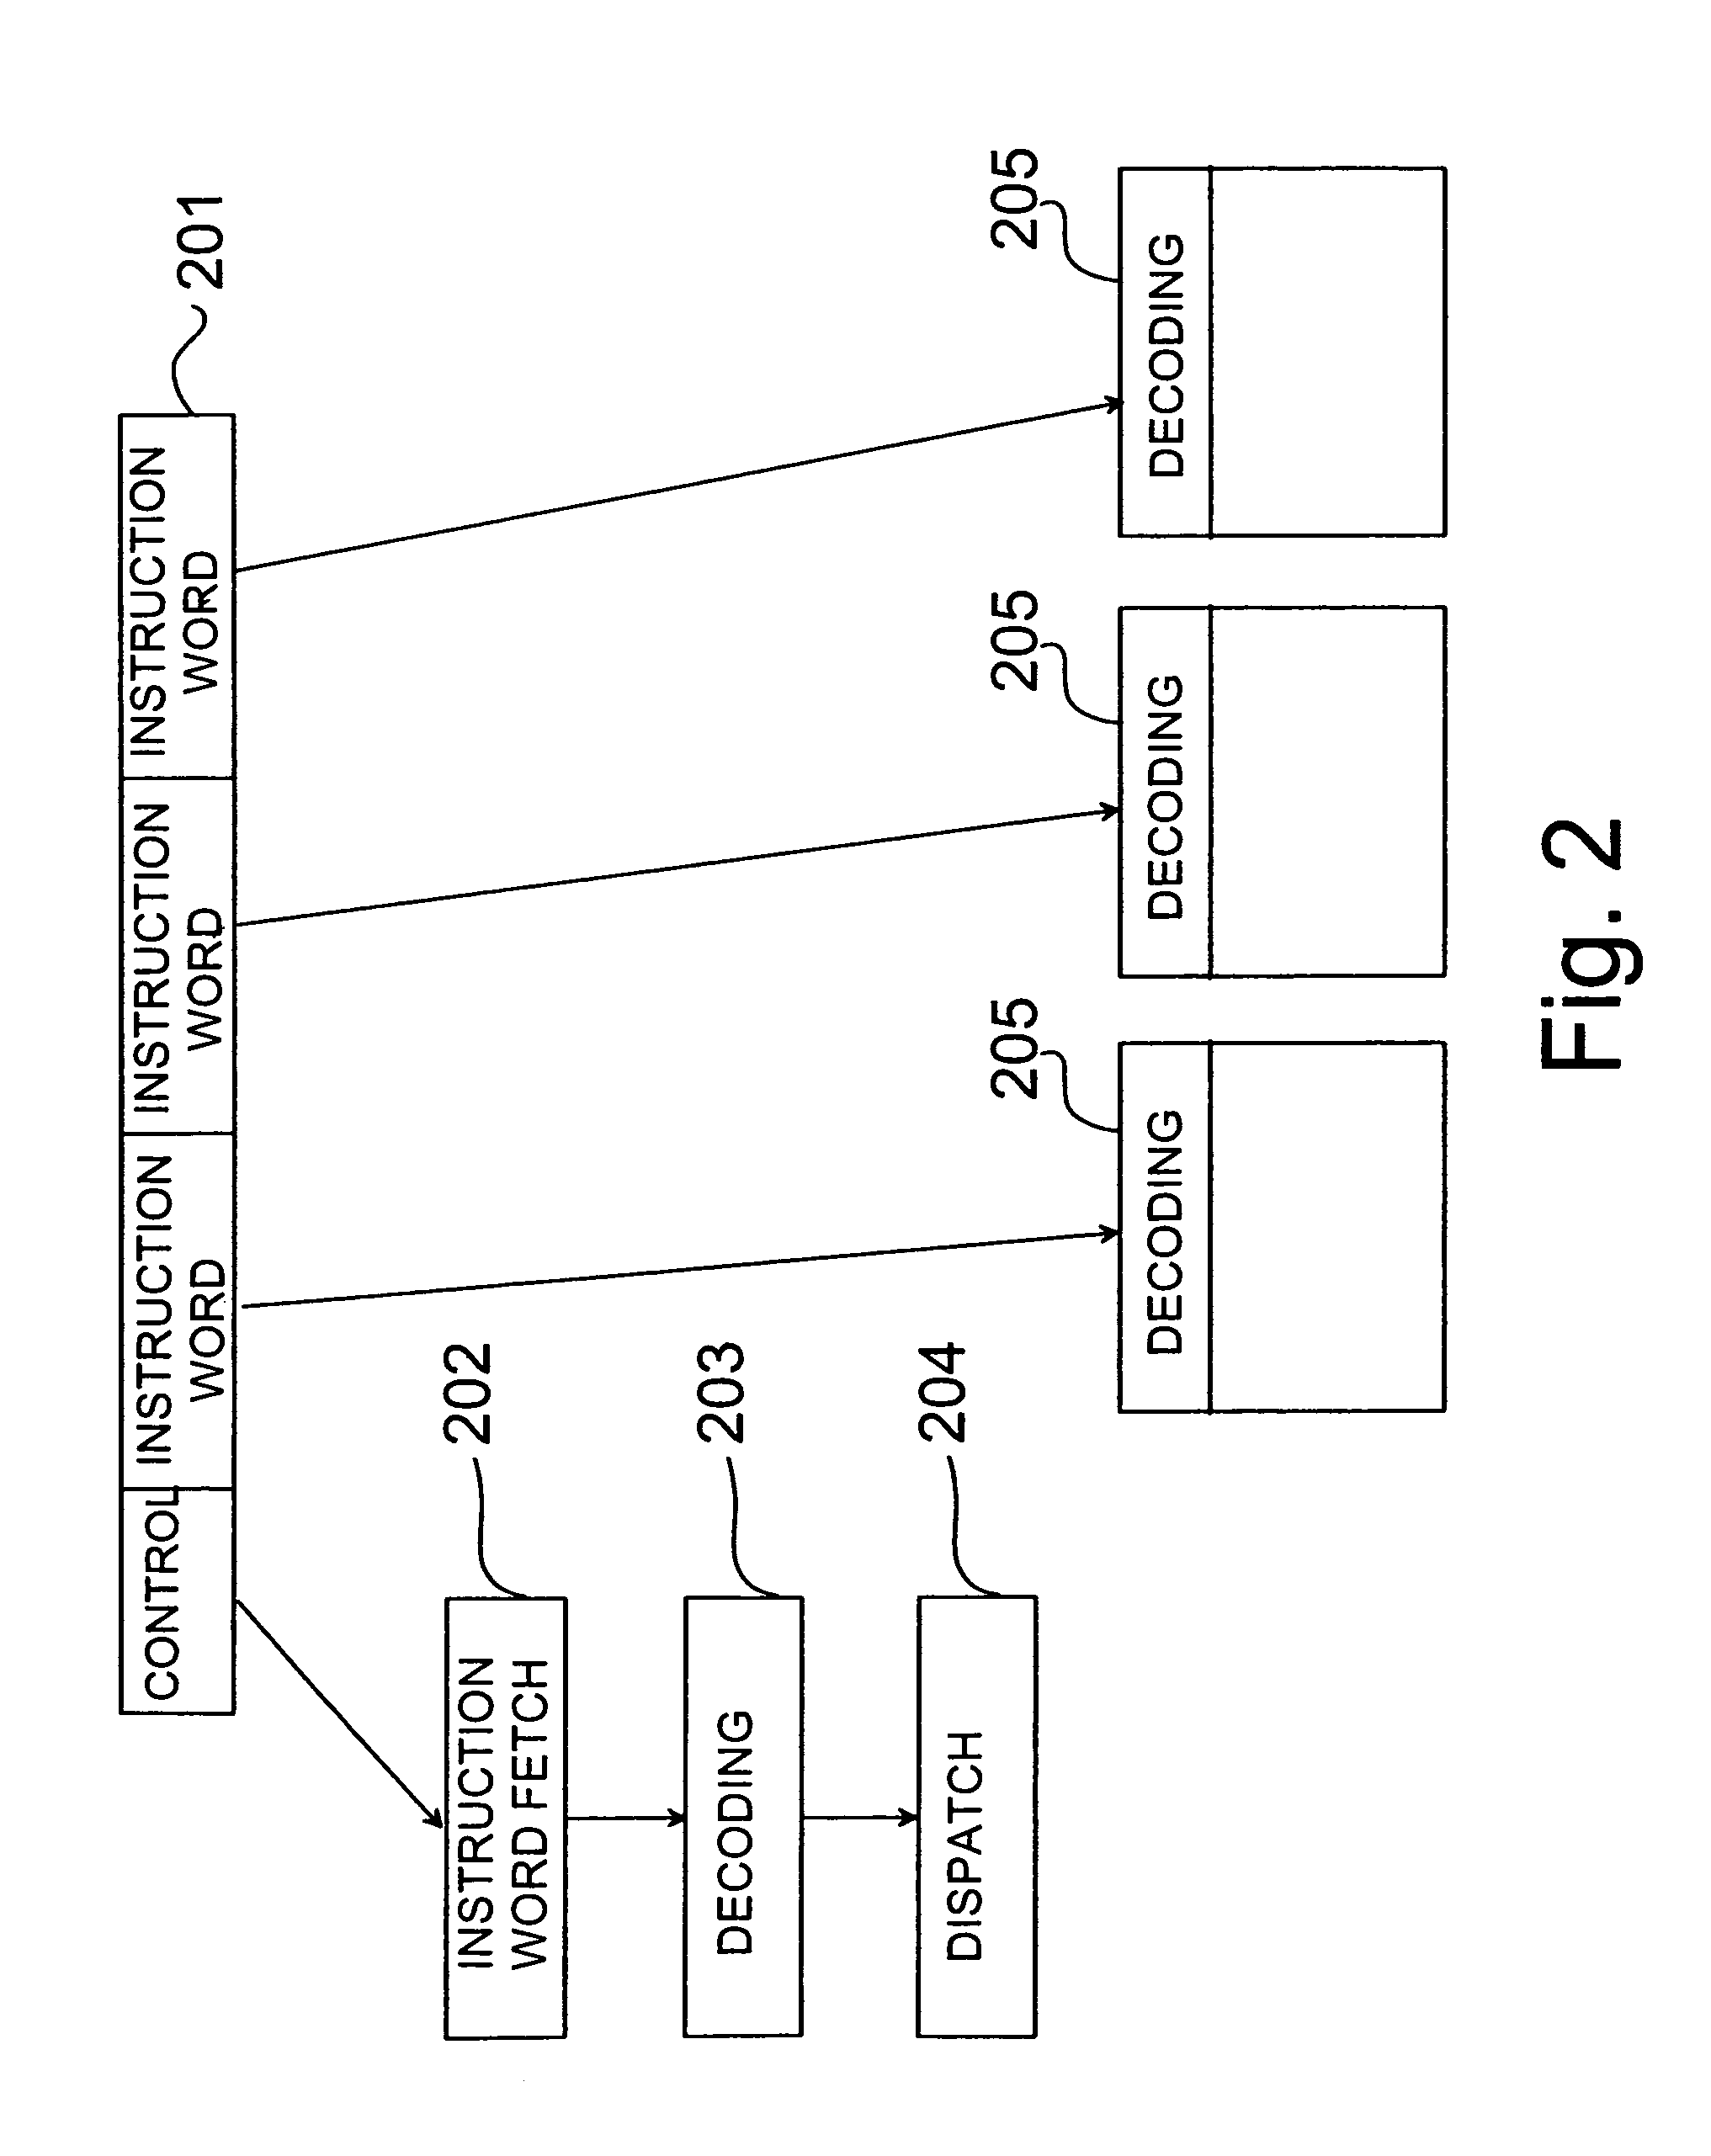 System for controlling operation of a processor based on information contained within instruction word